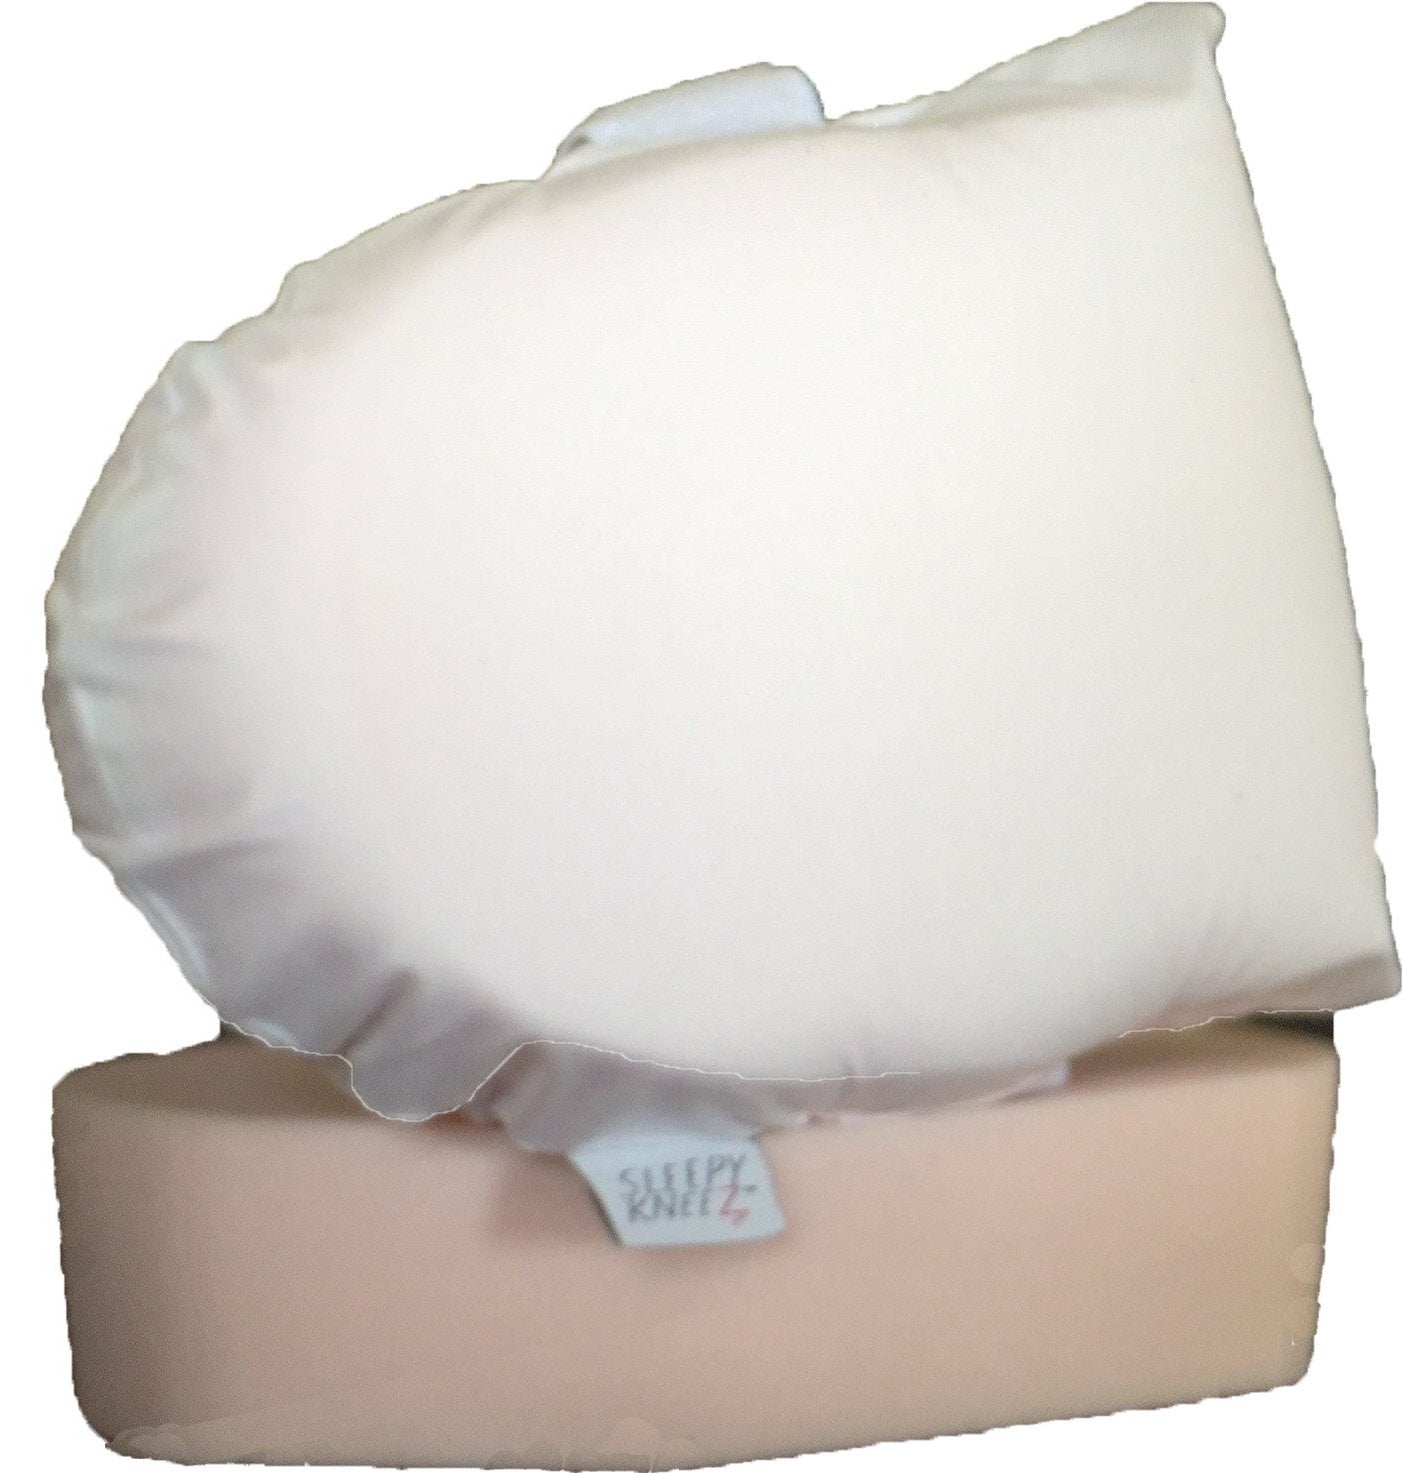 Memory Foam Knee Pillow, Between the Knee Pillow  Buy Knee Pillow for  better sleep without back, hip & knee pain